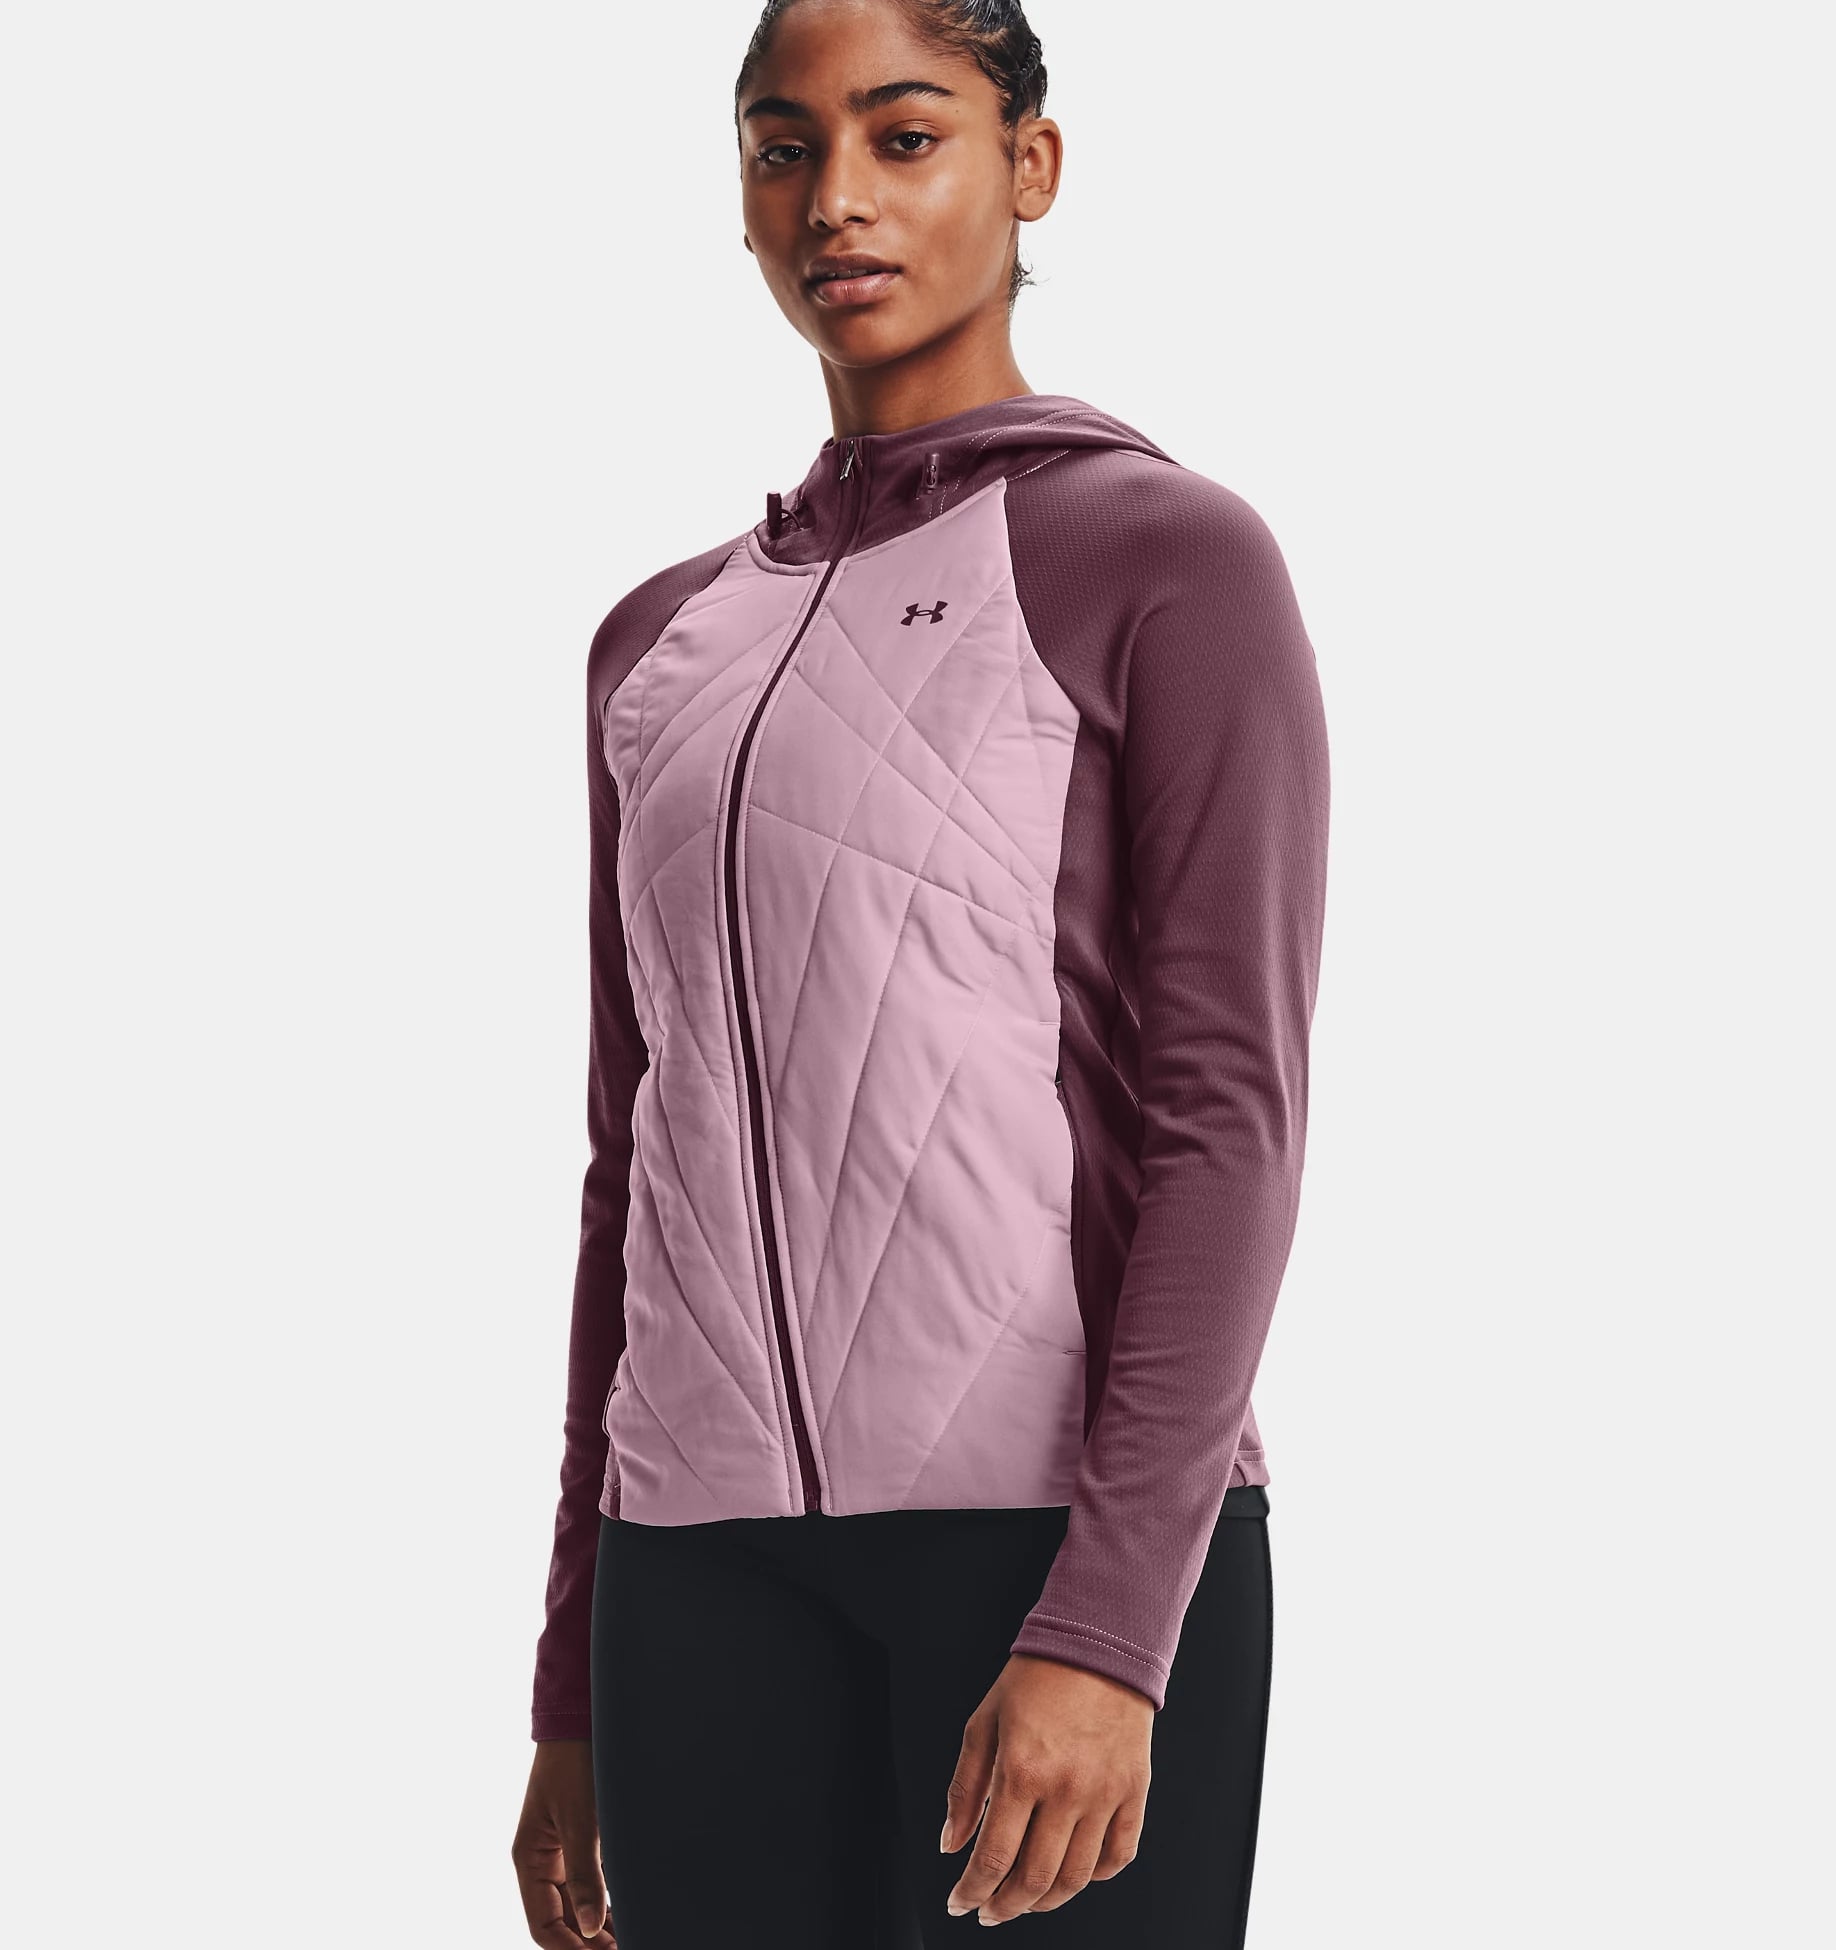 Layer Up: Under Armour's Coldgear® Infrared tech is the future